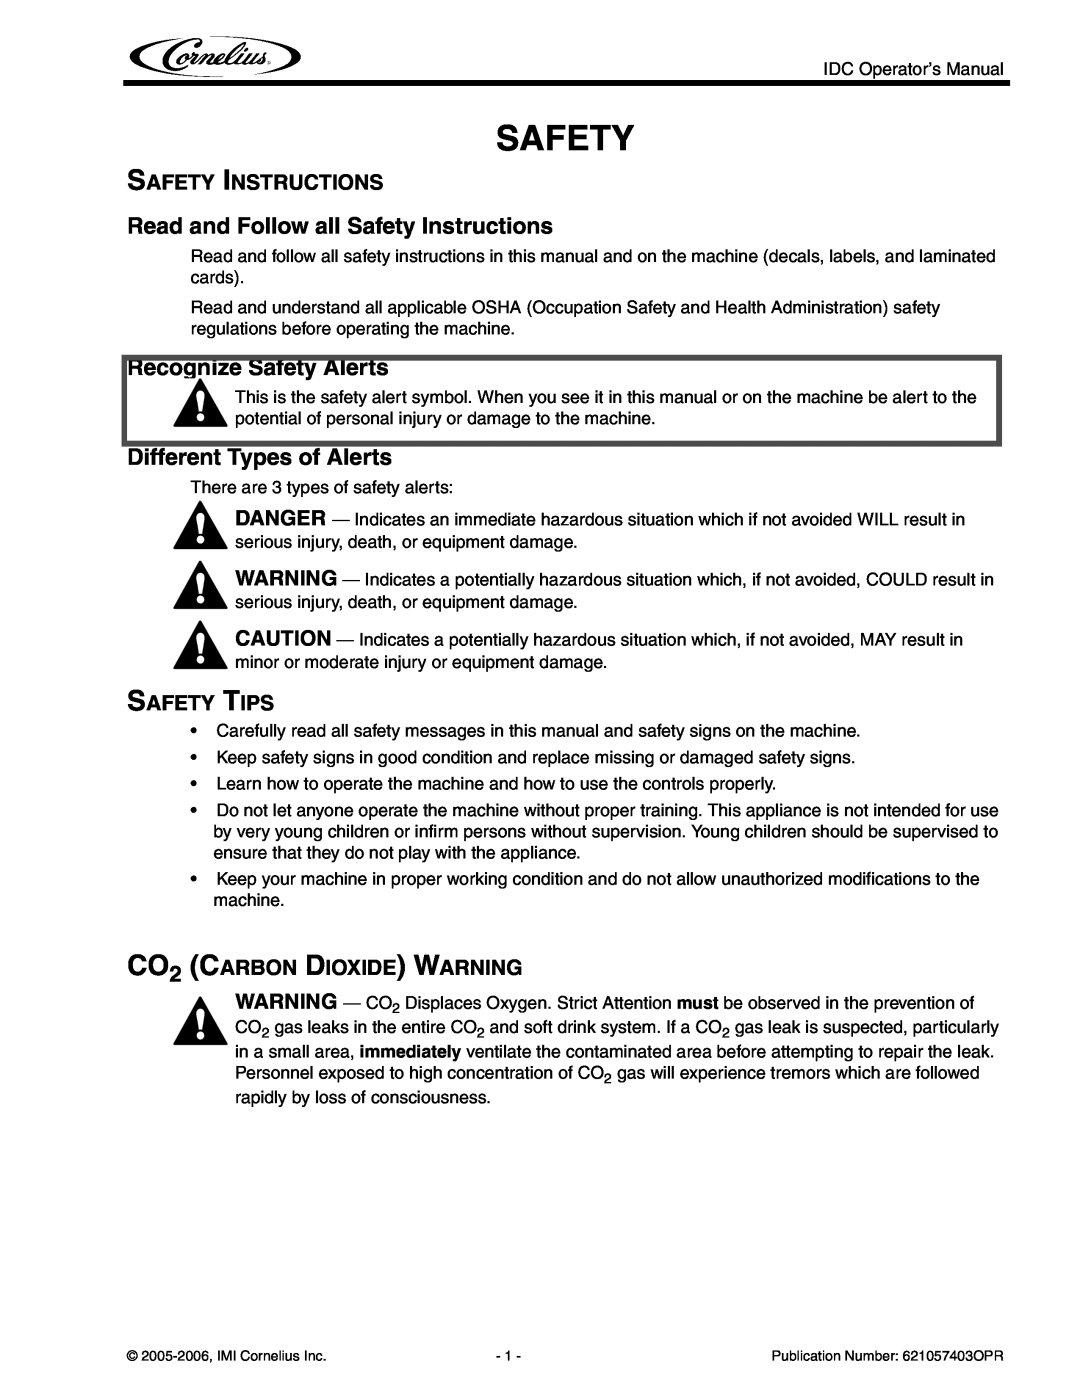 Cornelius IDC 2XX manual Read and Follow all Safety Instructions, Recognize Safety Alerts, Different Types of Alerts 